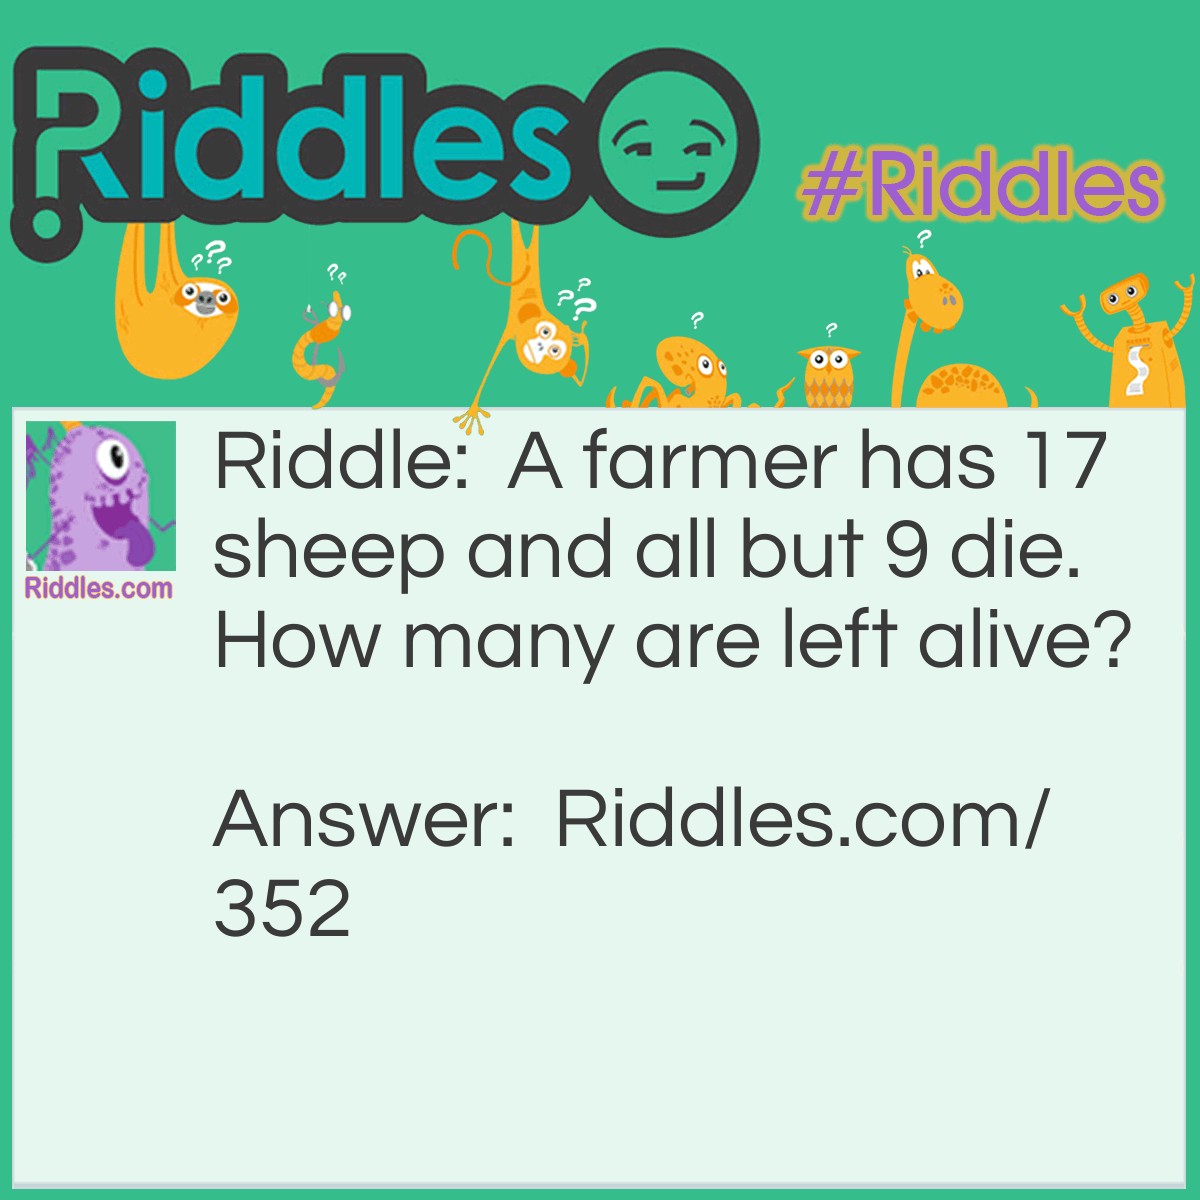 Riddle: A farmer has 17 sheep and all but 9 die. How many are left alive? Answer: 9.